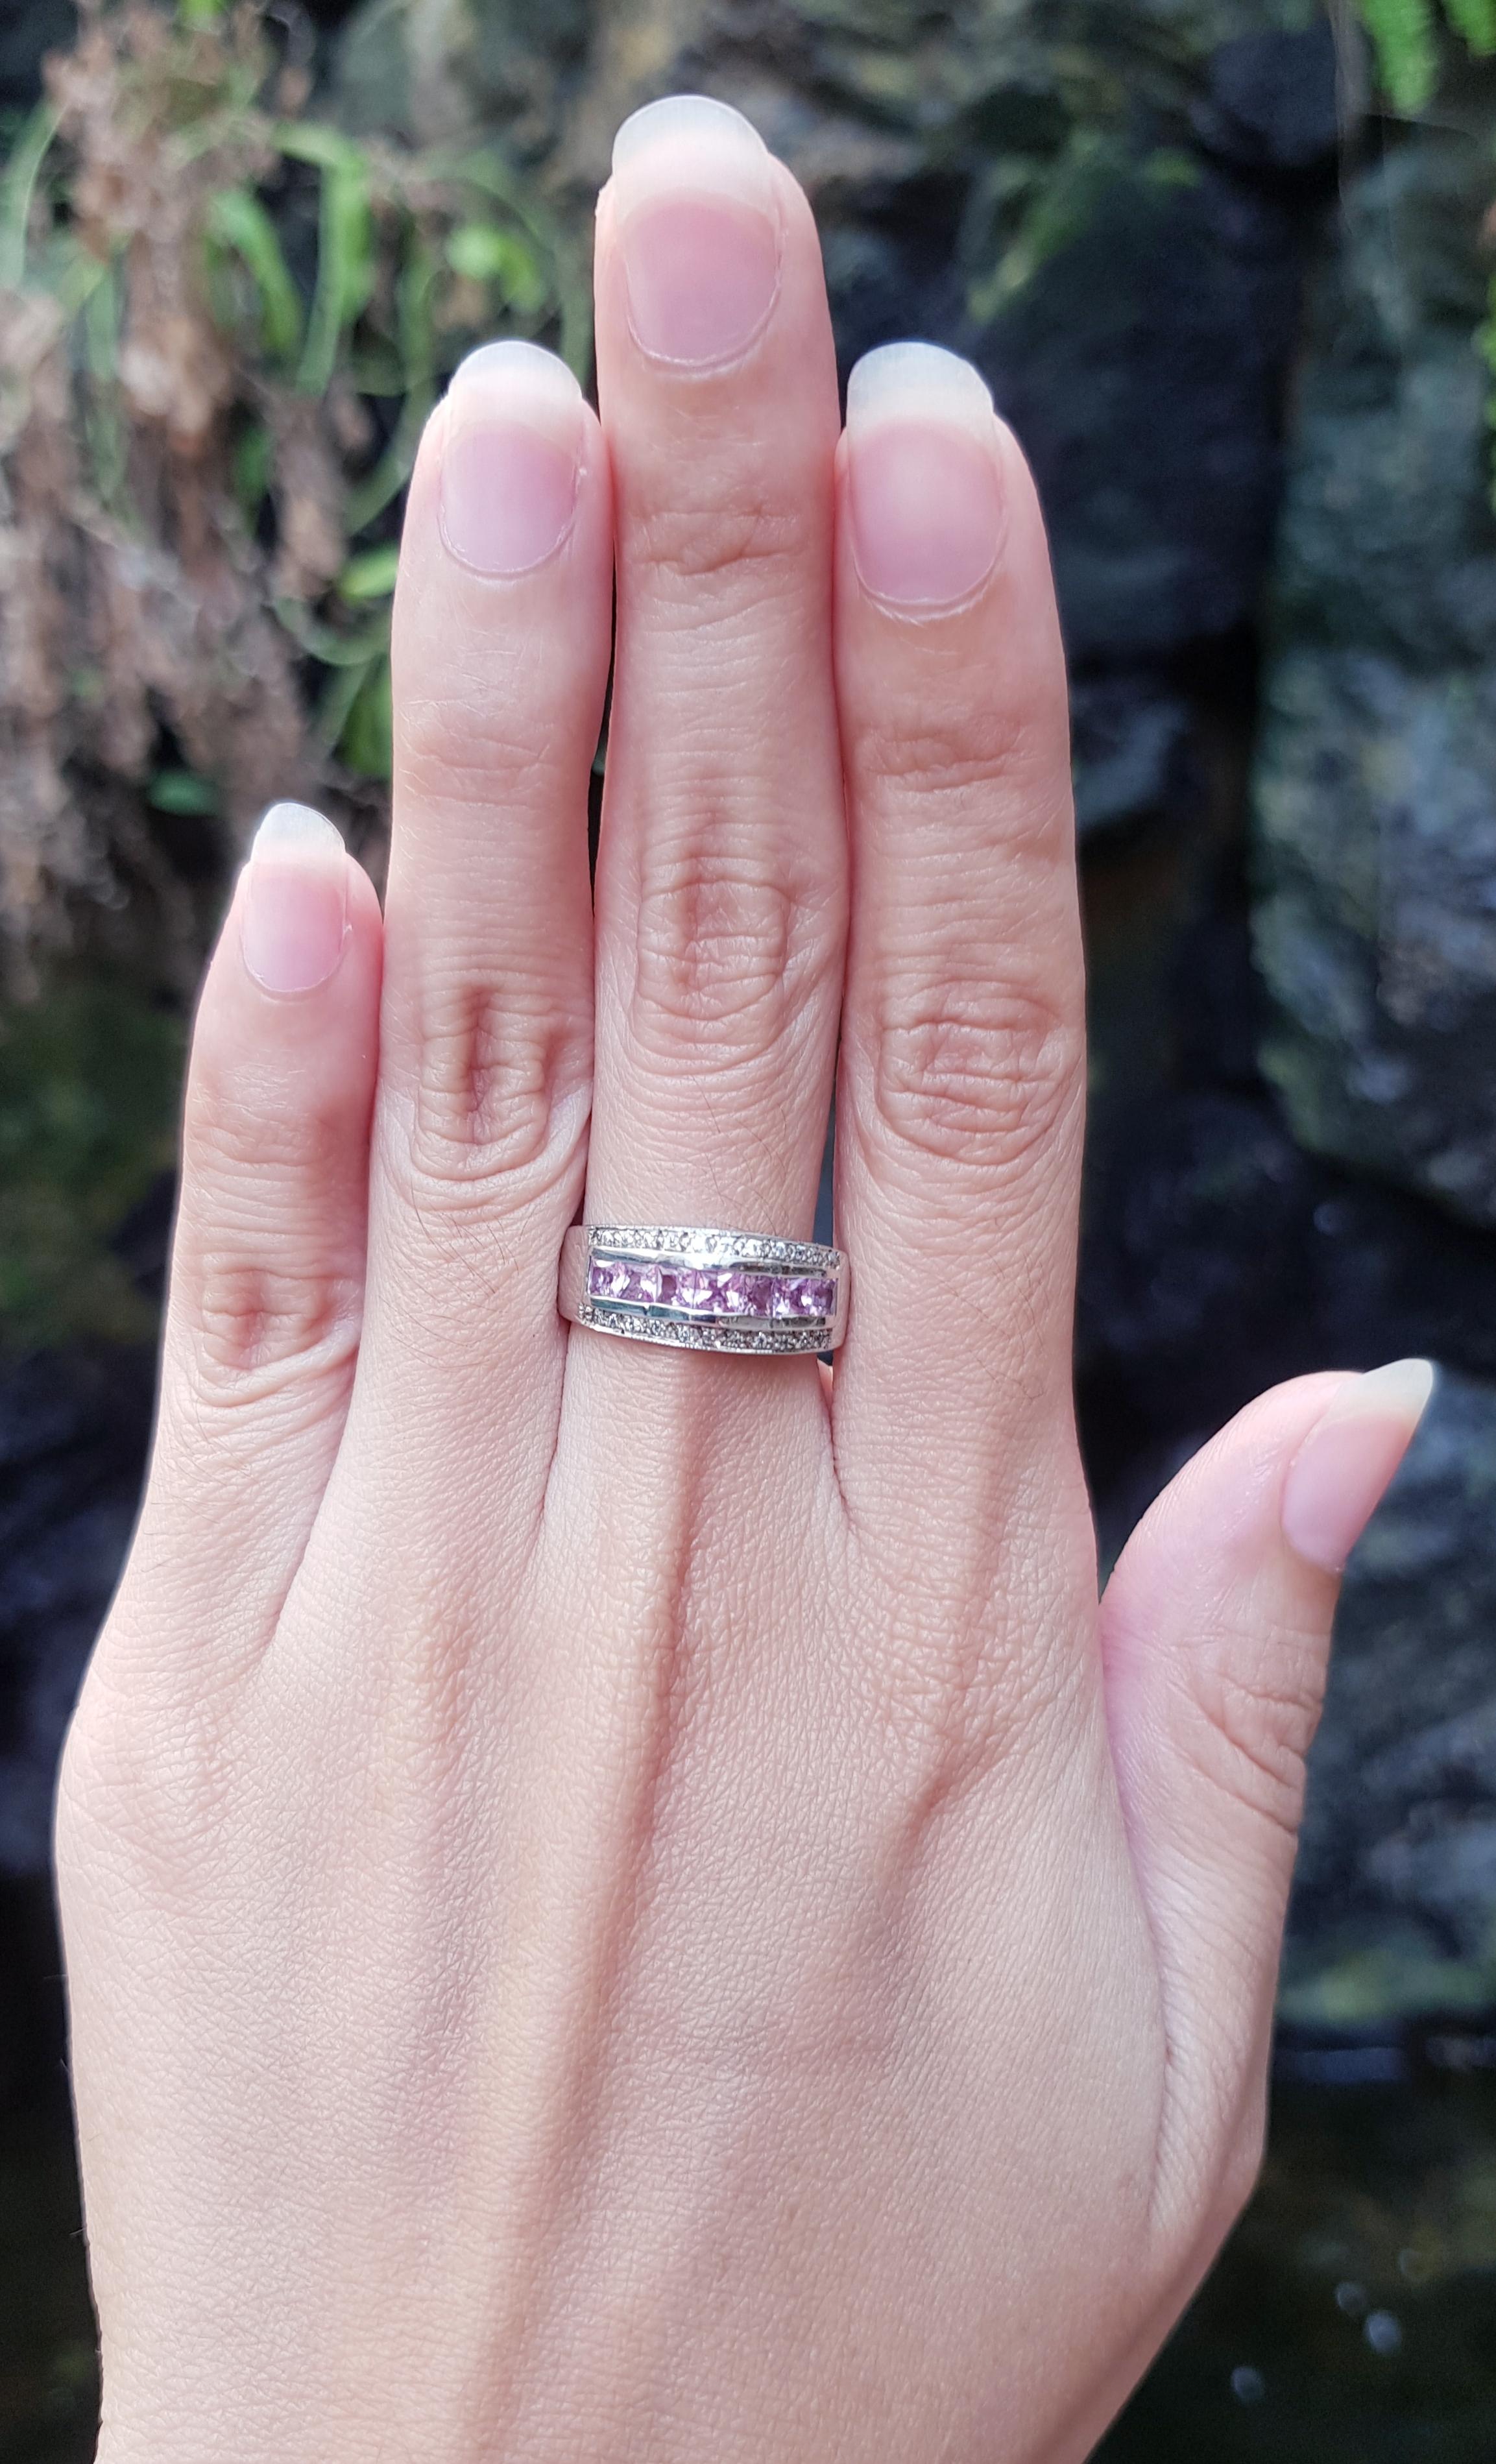 Pink Sapphire with Cubic Zirconia Ring set in Silver Settings

Width:  1.7 cm 
Length: 0.8 cm
Ring Size: 53
Total Weight: 3.86 grams

*Please note that the silver setting is plated with rhodium to promote shine and help prevent oxidation.  However,